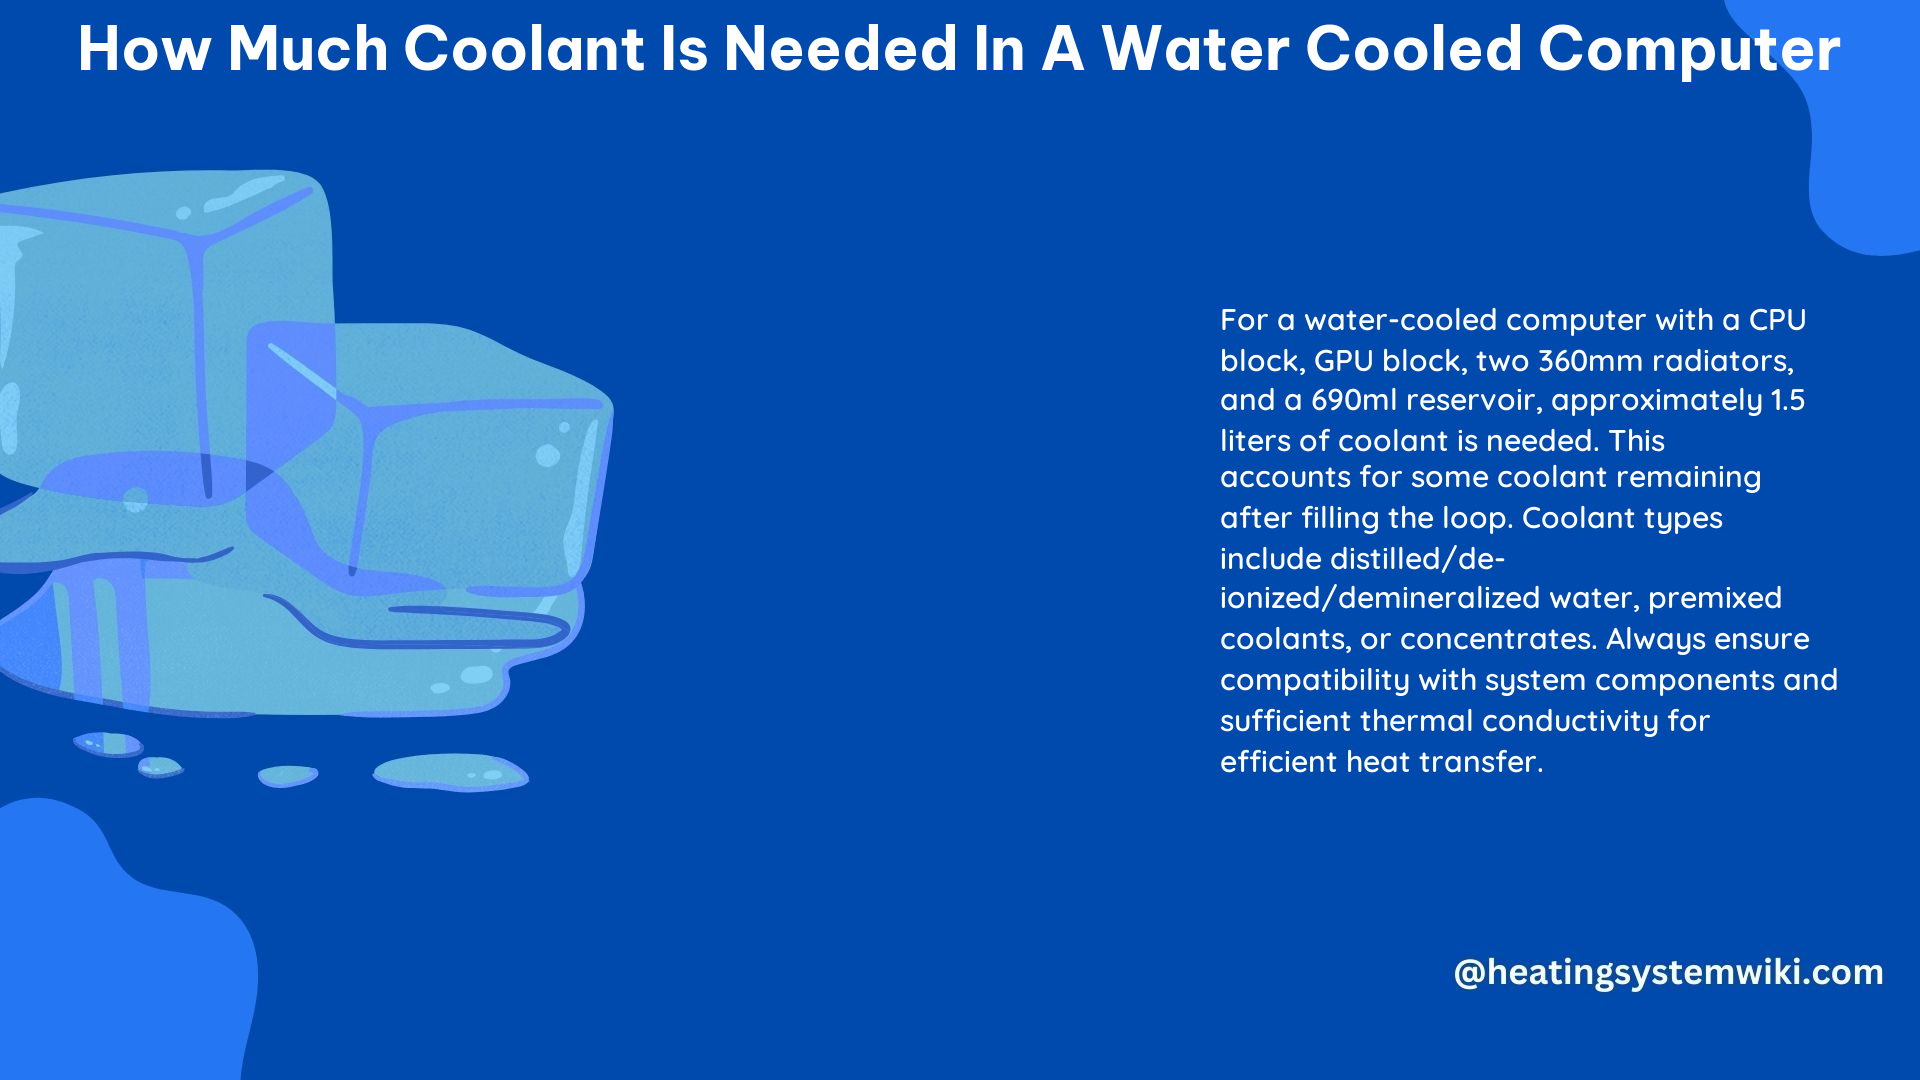 How Much Coolant Is Needed in a Water Cooled Computer